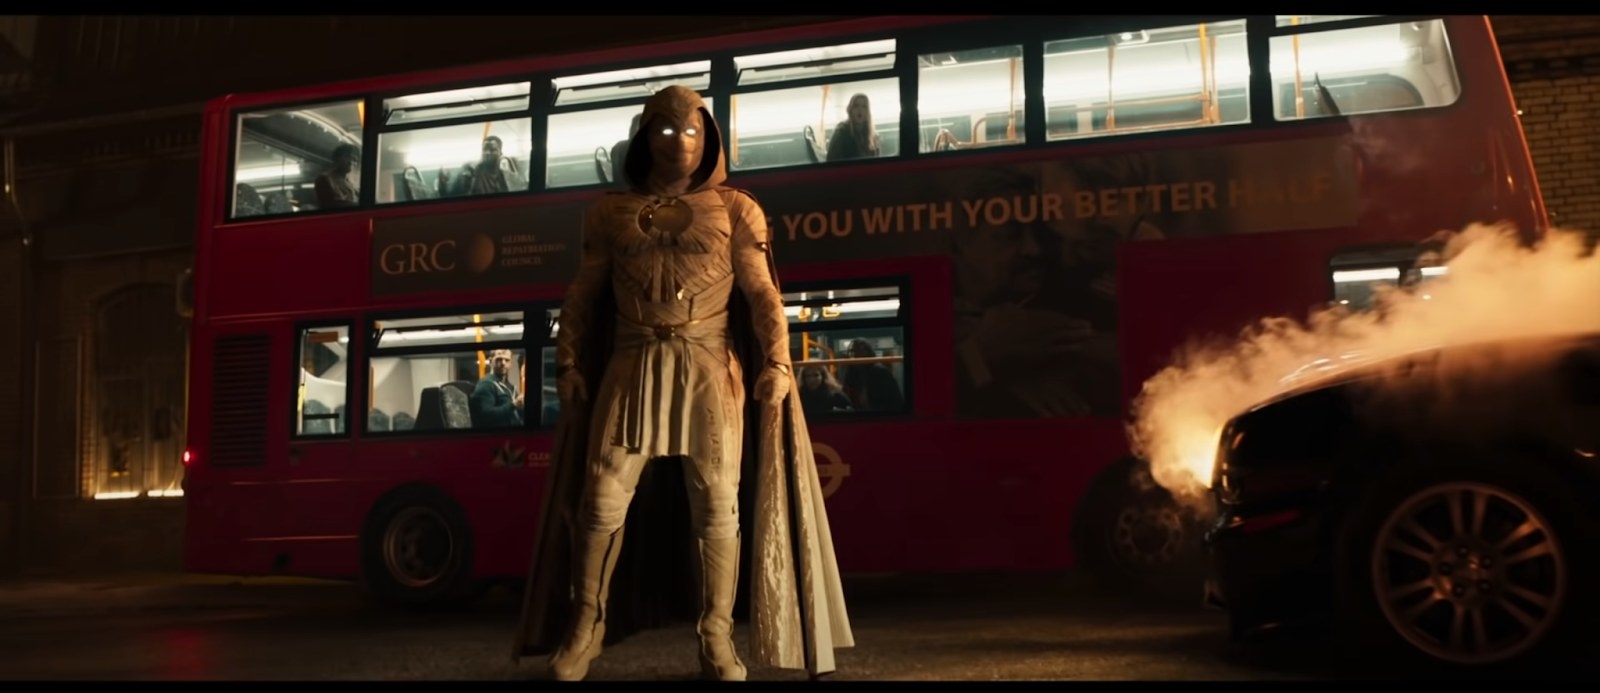 Moon Knight standing in front of a red double decker bus with a sign for the GRC on it